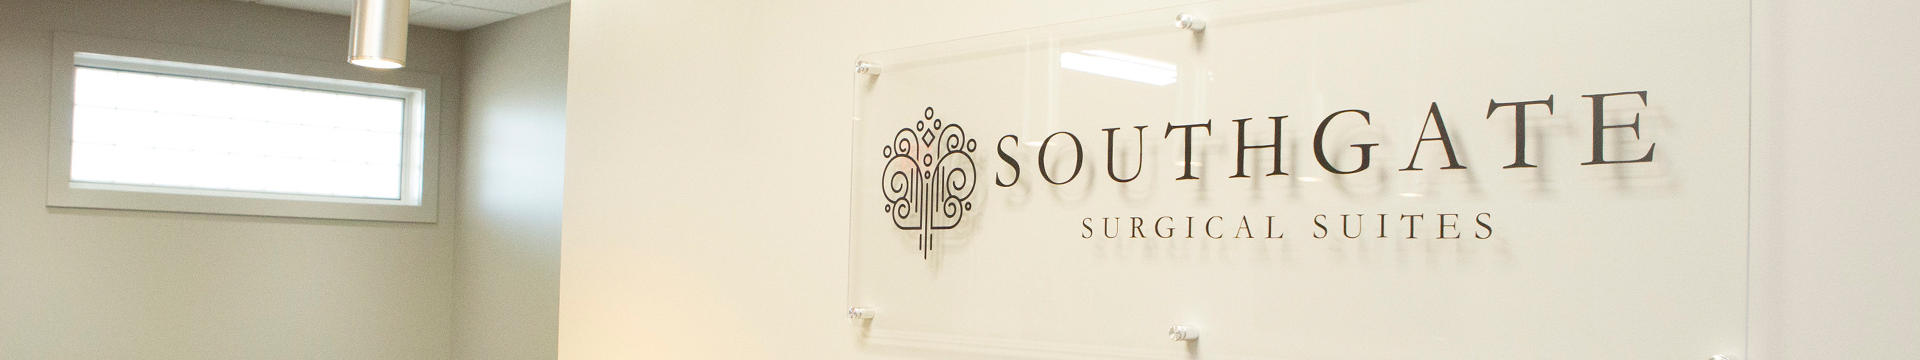 About Us | Southgate Surgical Suites